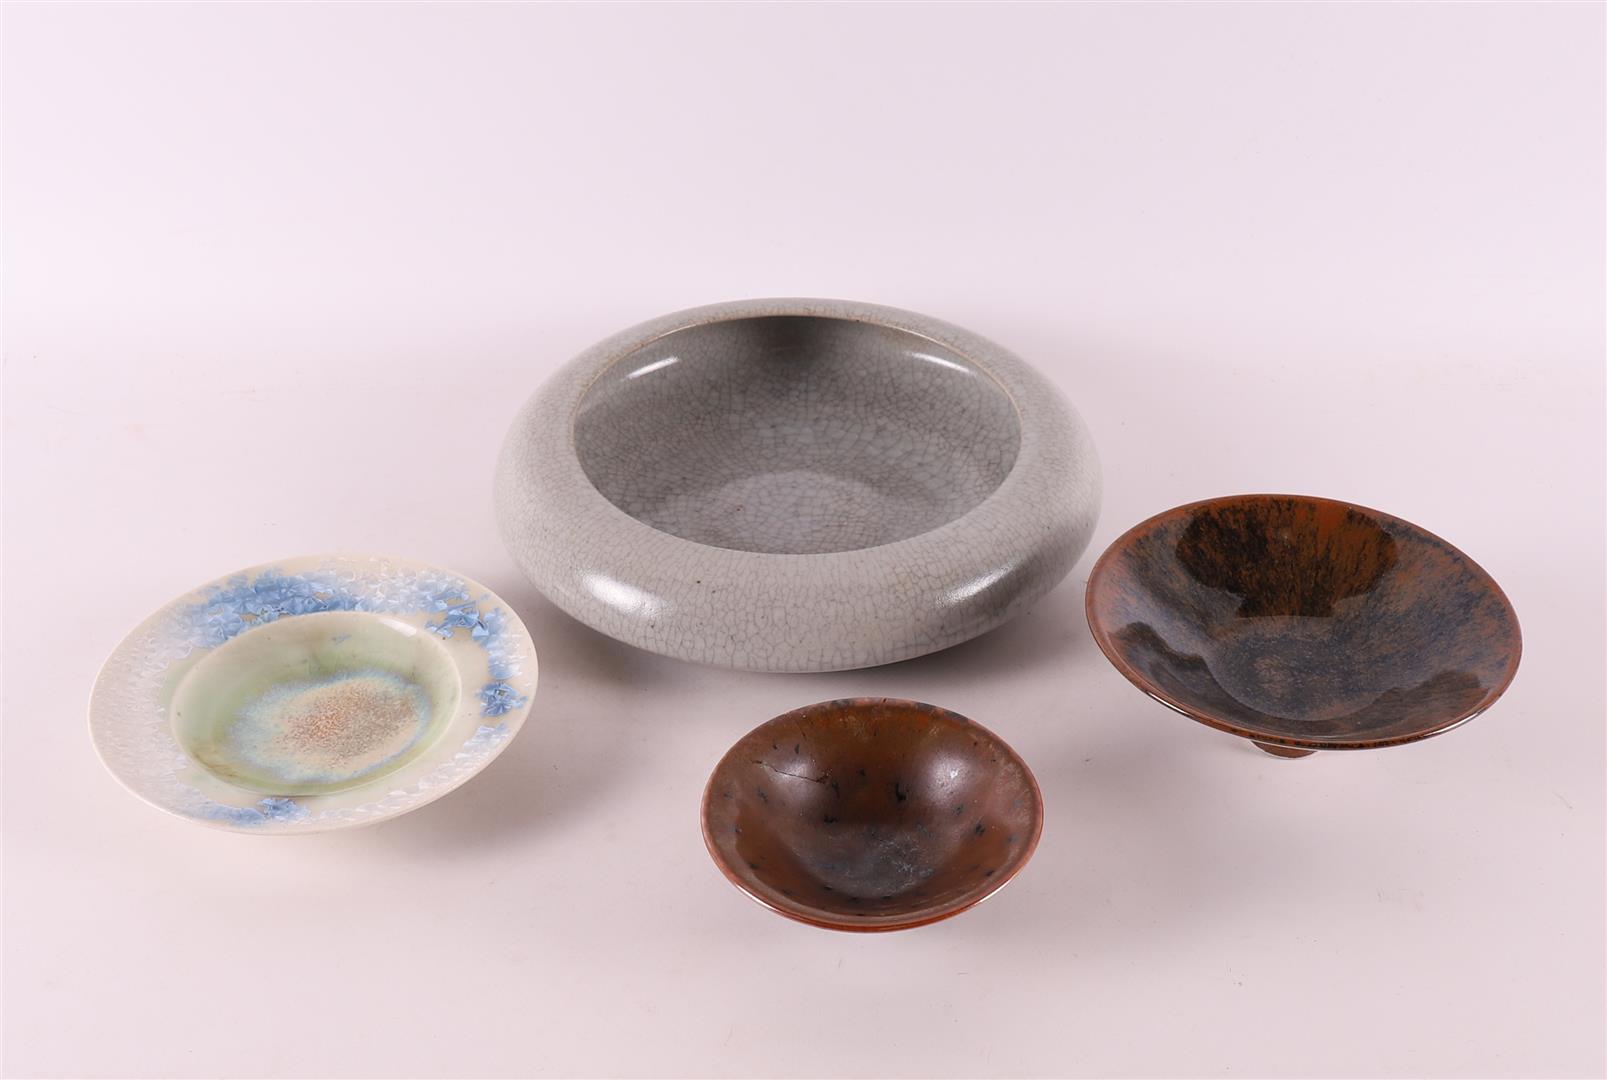 Four porcelain dishes, all designed by Johan Broekema (1943-2010).